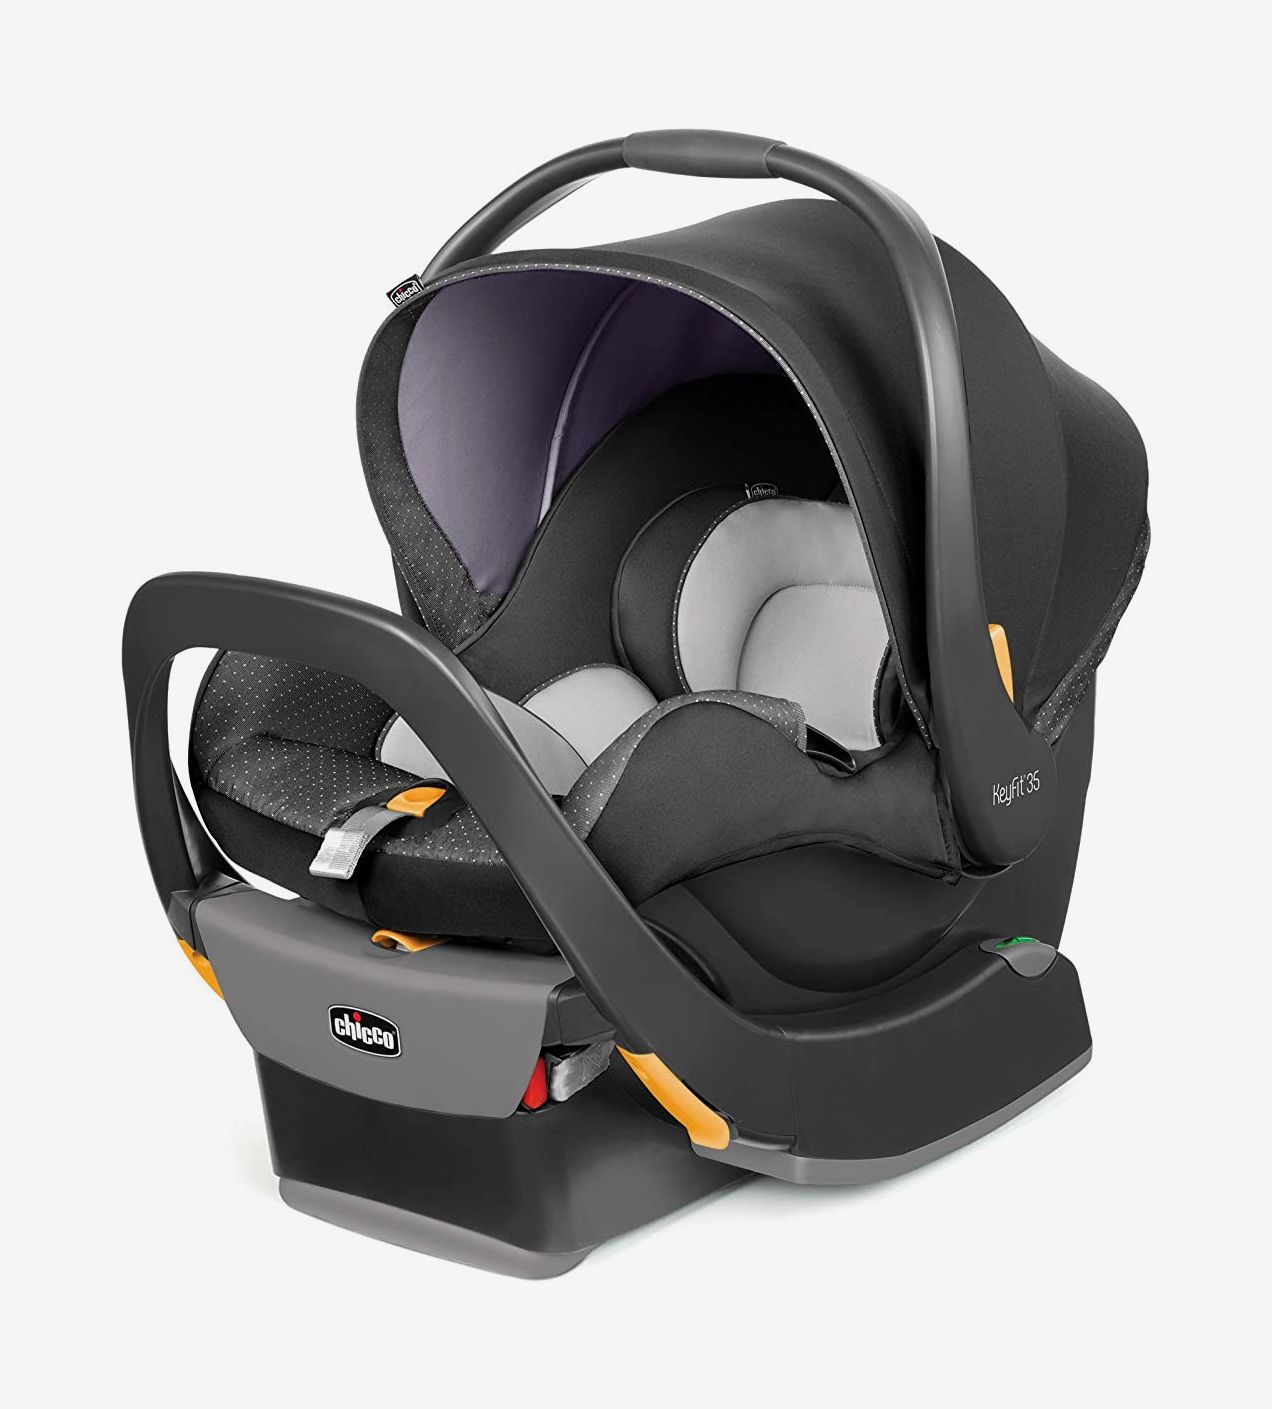 25 Best Infant Car Seats And Booster 2020 The Strategist - Top Rated Infant Car Seats 2020